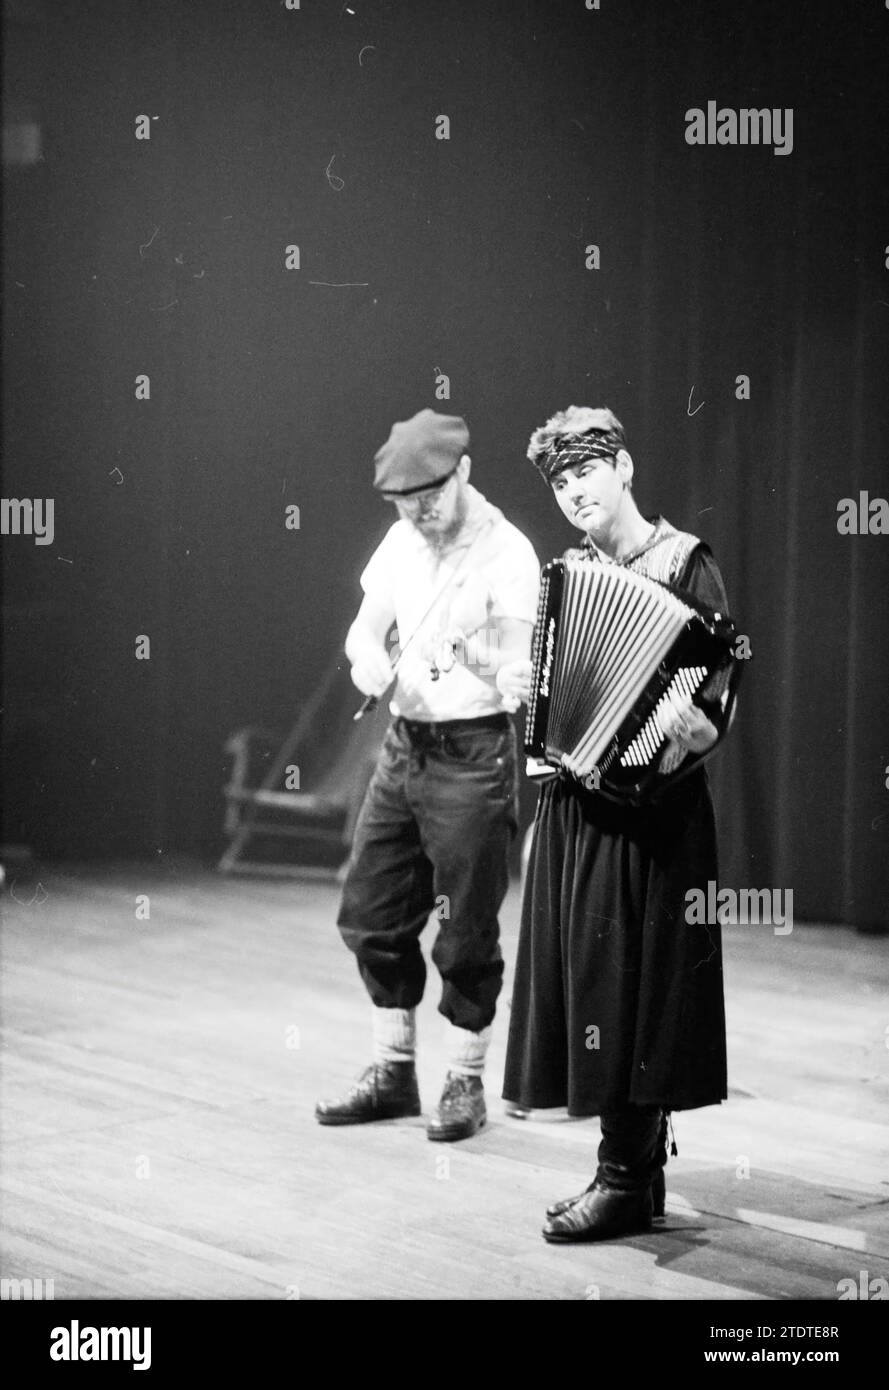 Music theater 'Dreams of Uncle Herman', Music, Theater, 27-04-1990, Whizgle News from the Past, Tailored for the Future. Explore historical narratives, Dutch The Netherlands agency image with a modern perspective, bridging the gap between yesterday's events and tomorrow's insights. A timeless journey shaping the stories that shape our future Stock Photo